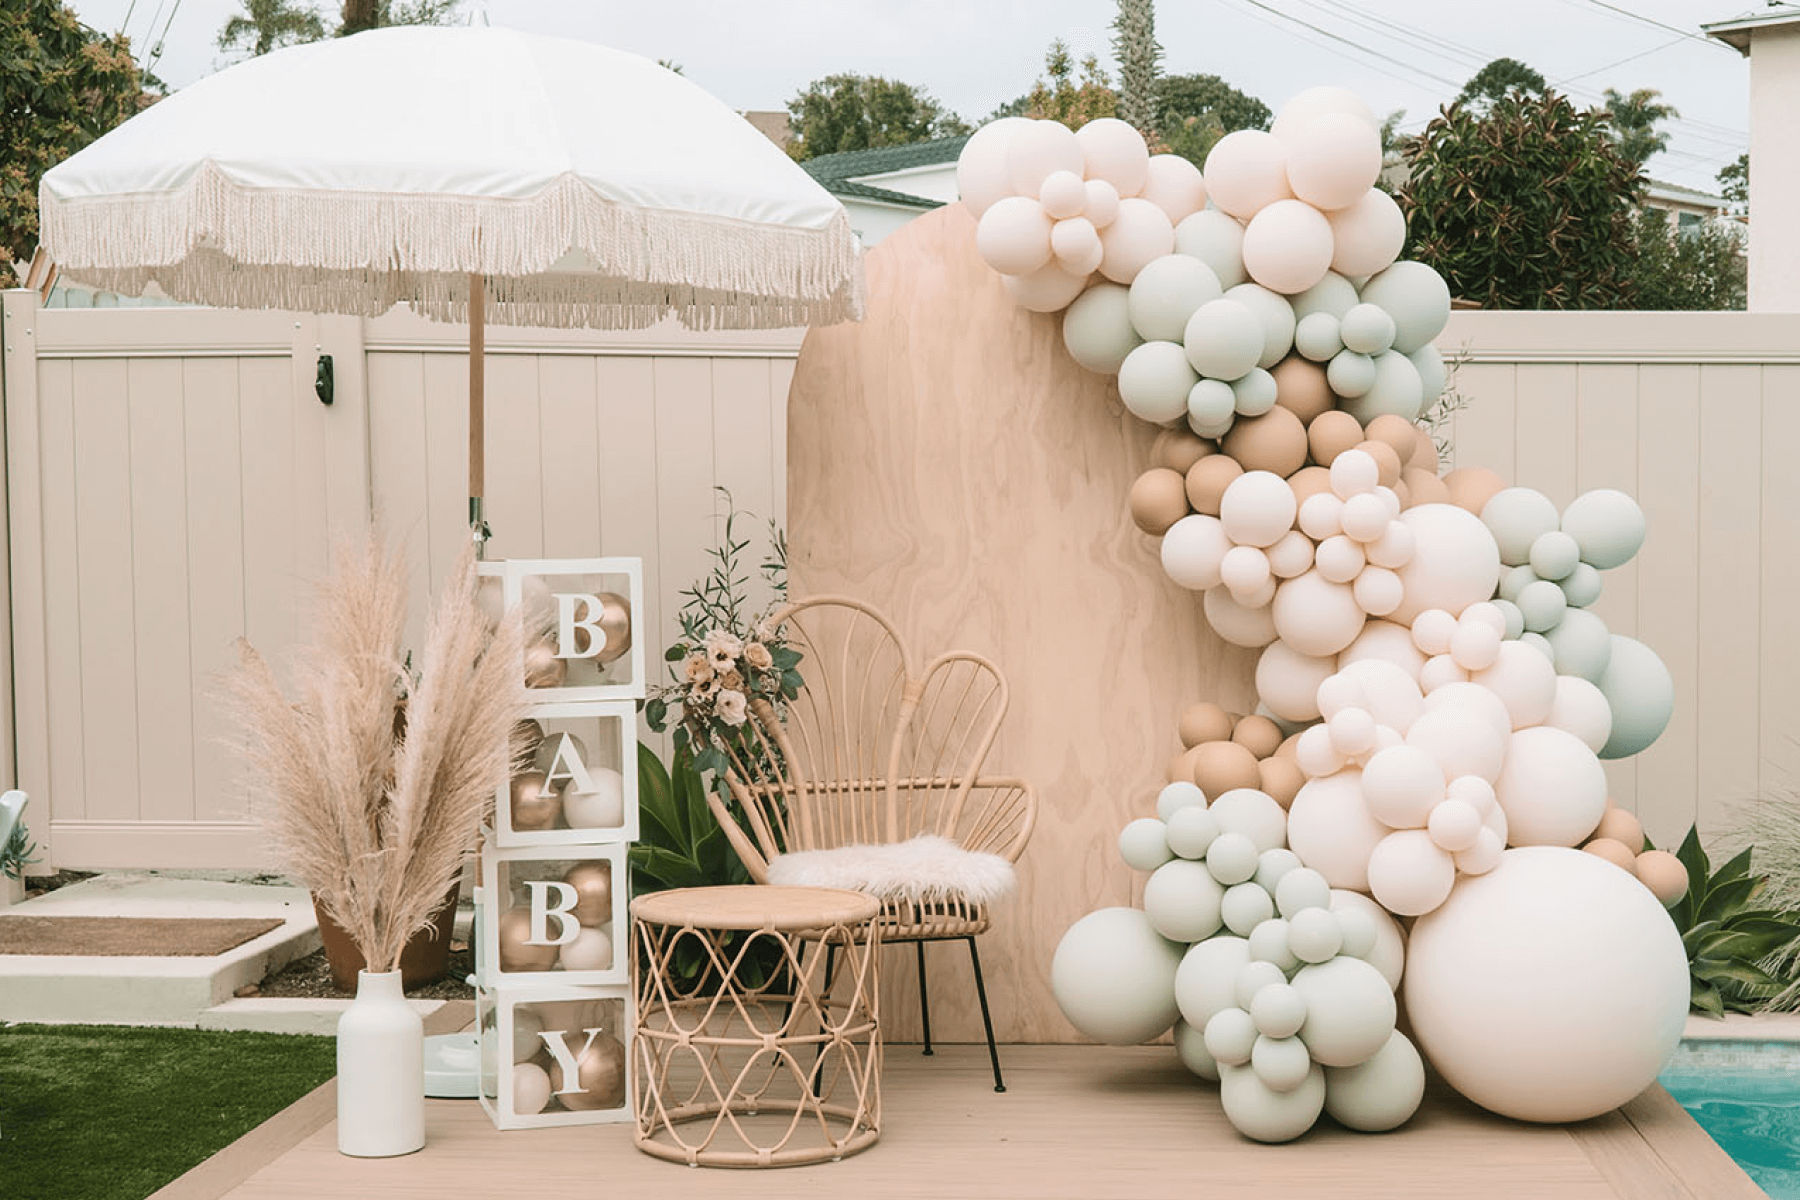 20 Baby Shower Theme Ideas to Celebrate a New Arrival